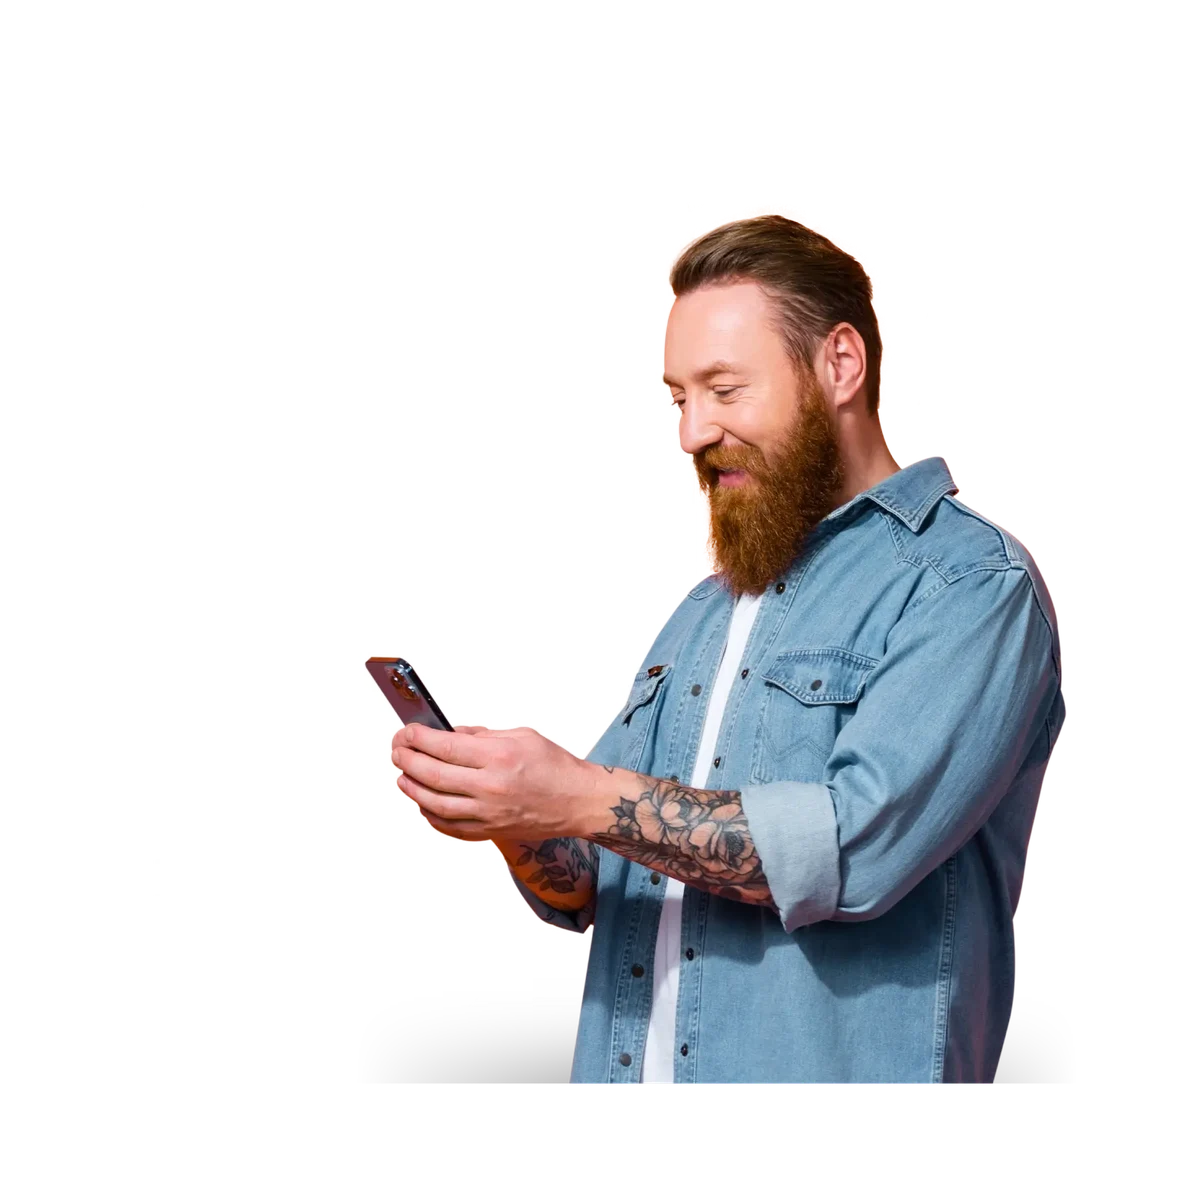 bearded man with tattoos and ad details in background